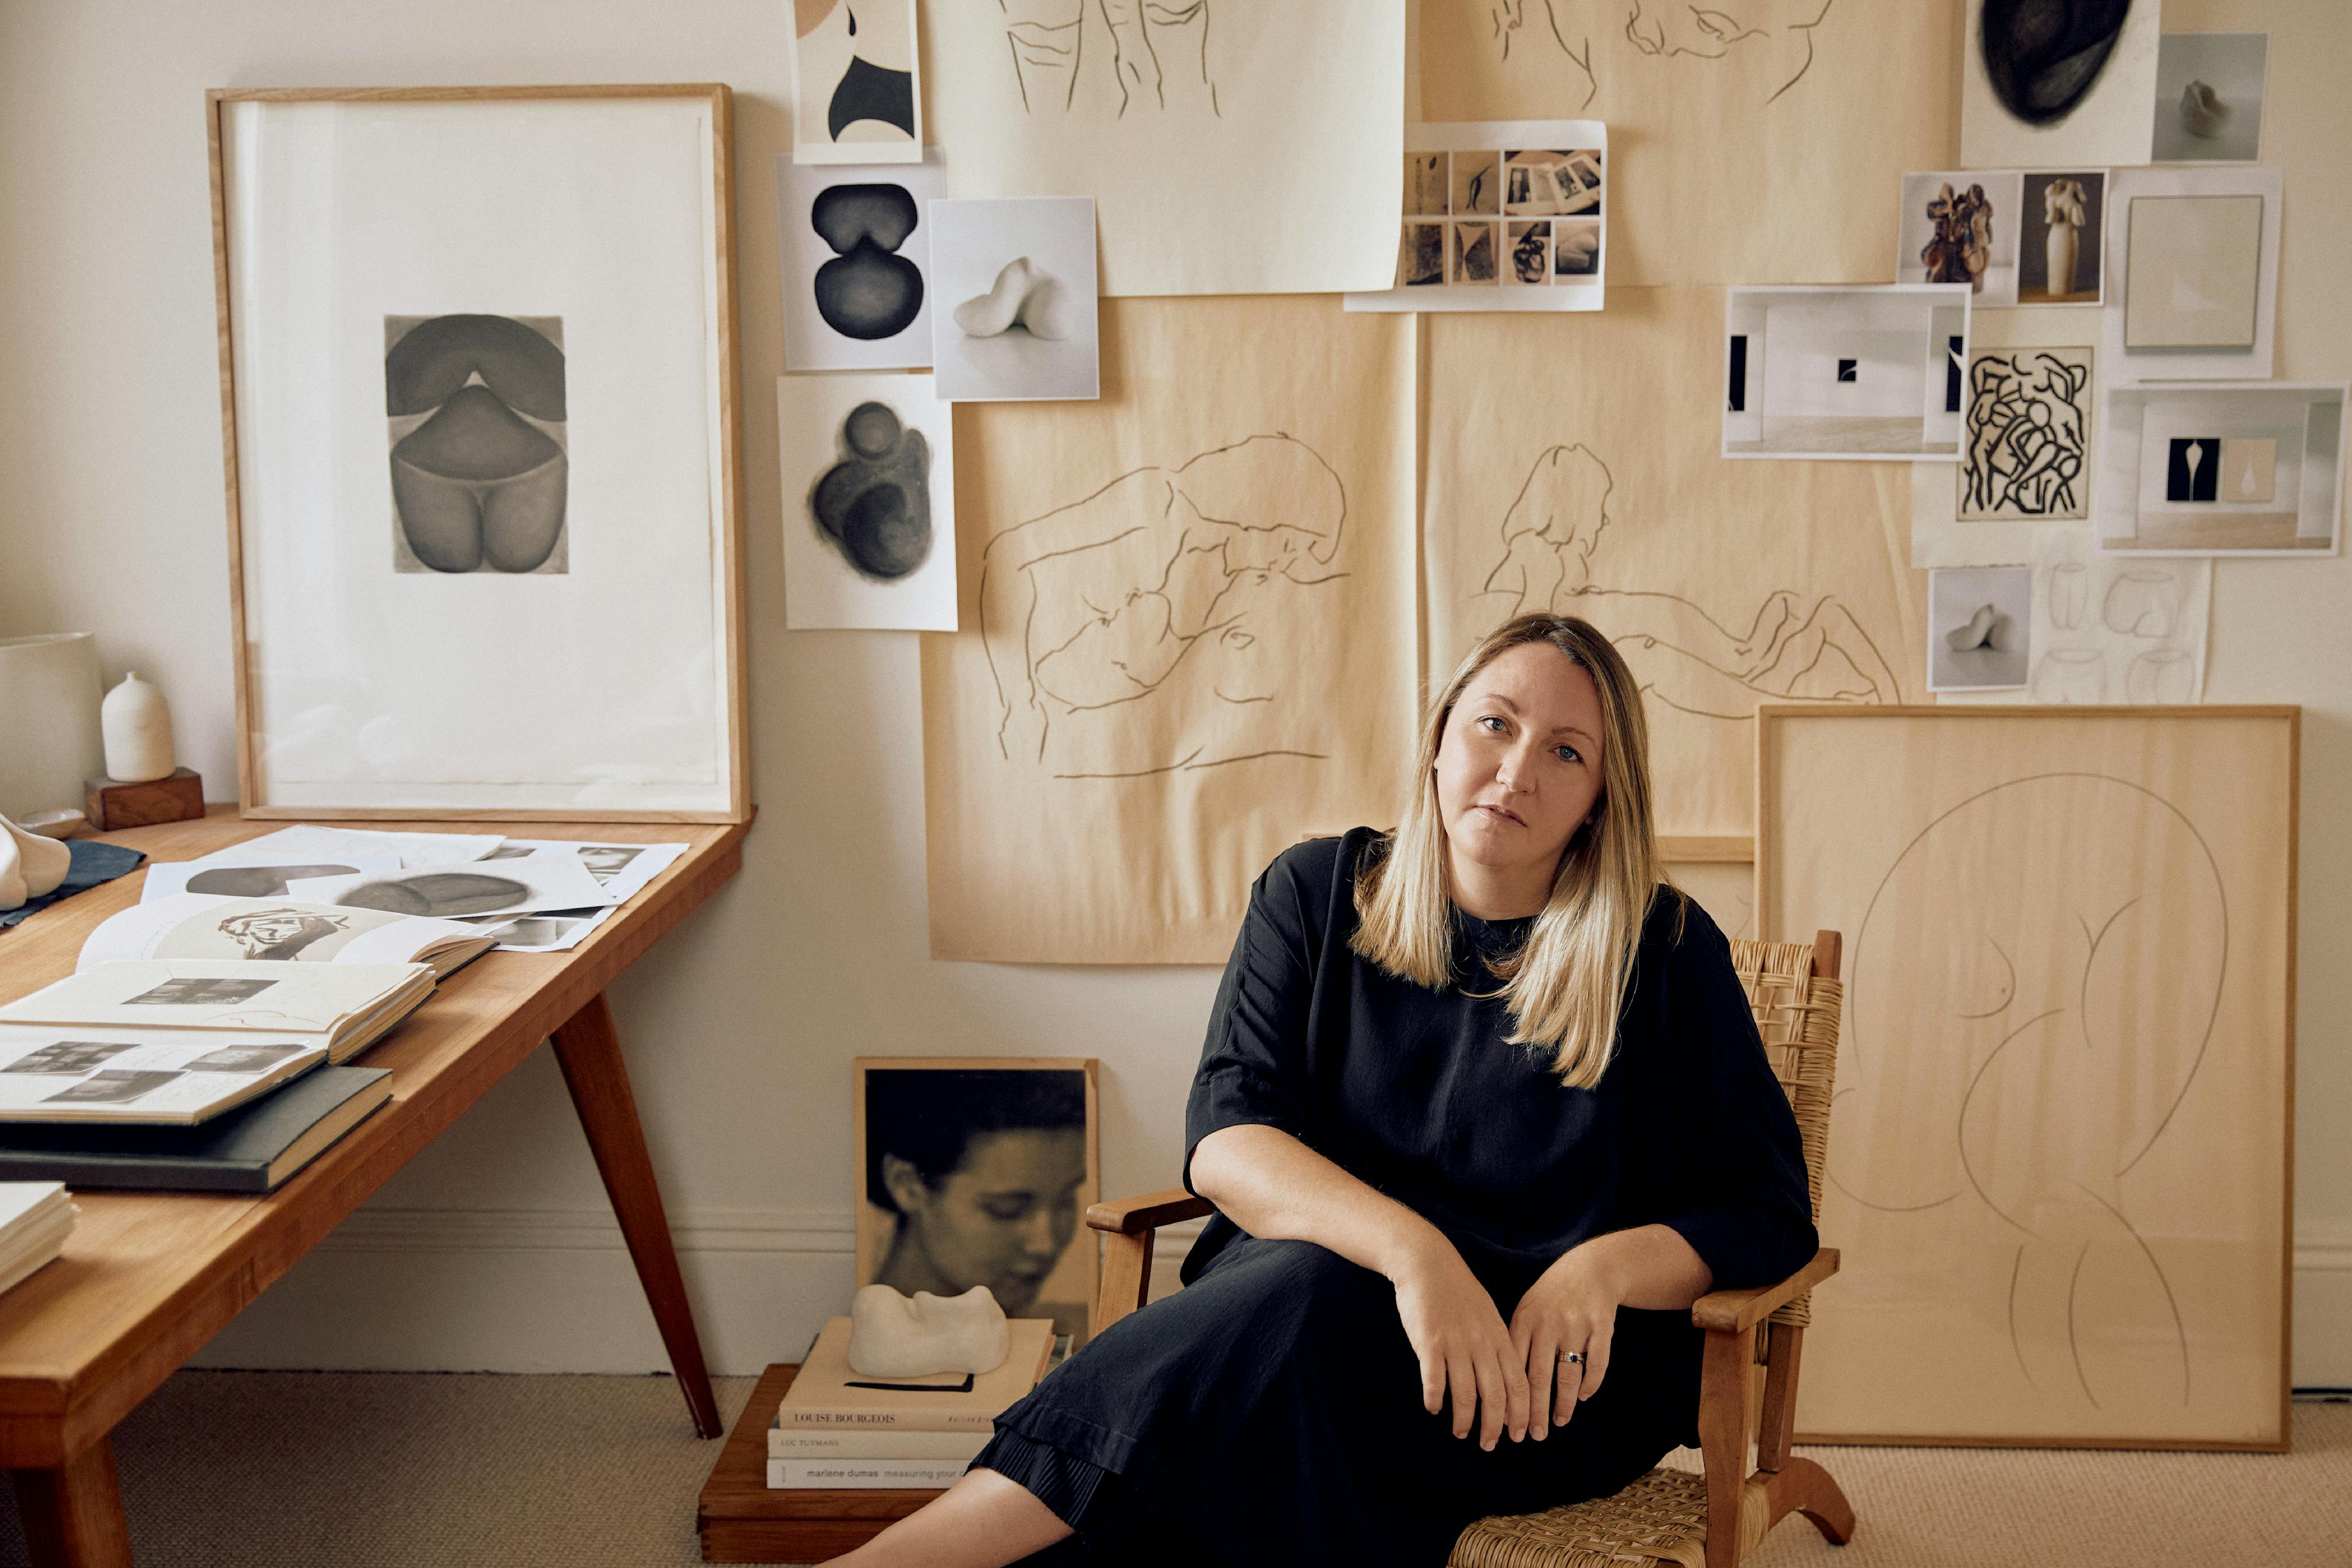 Artist Caroline Walls sits in her studio, surrounded by drawings pinned to the wall and a wood table with books laid out.